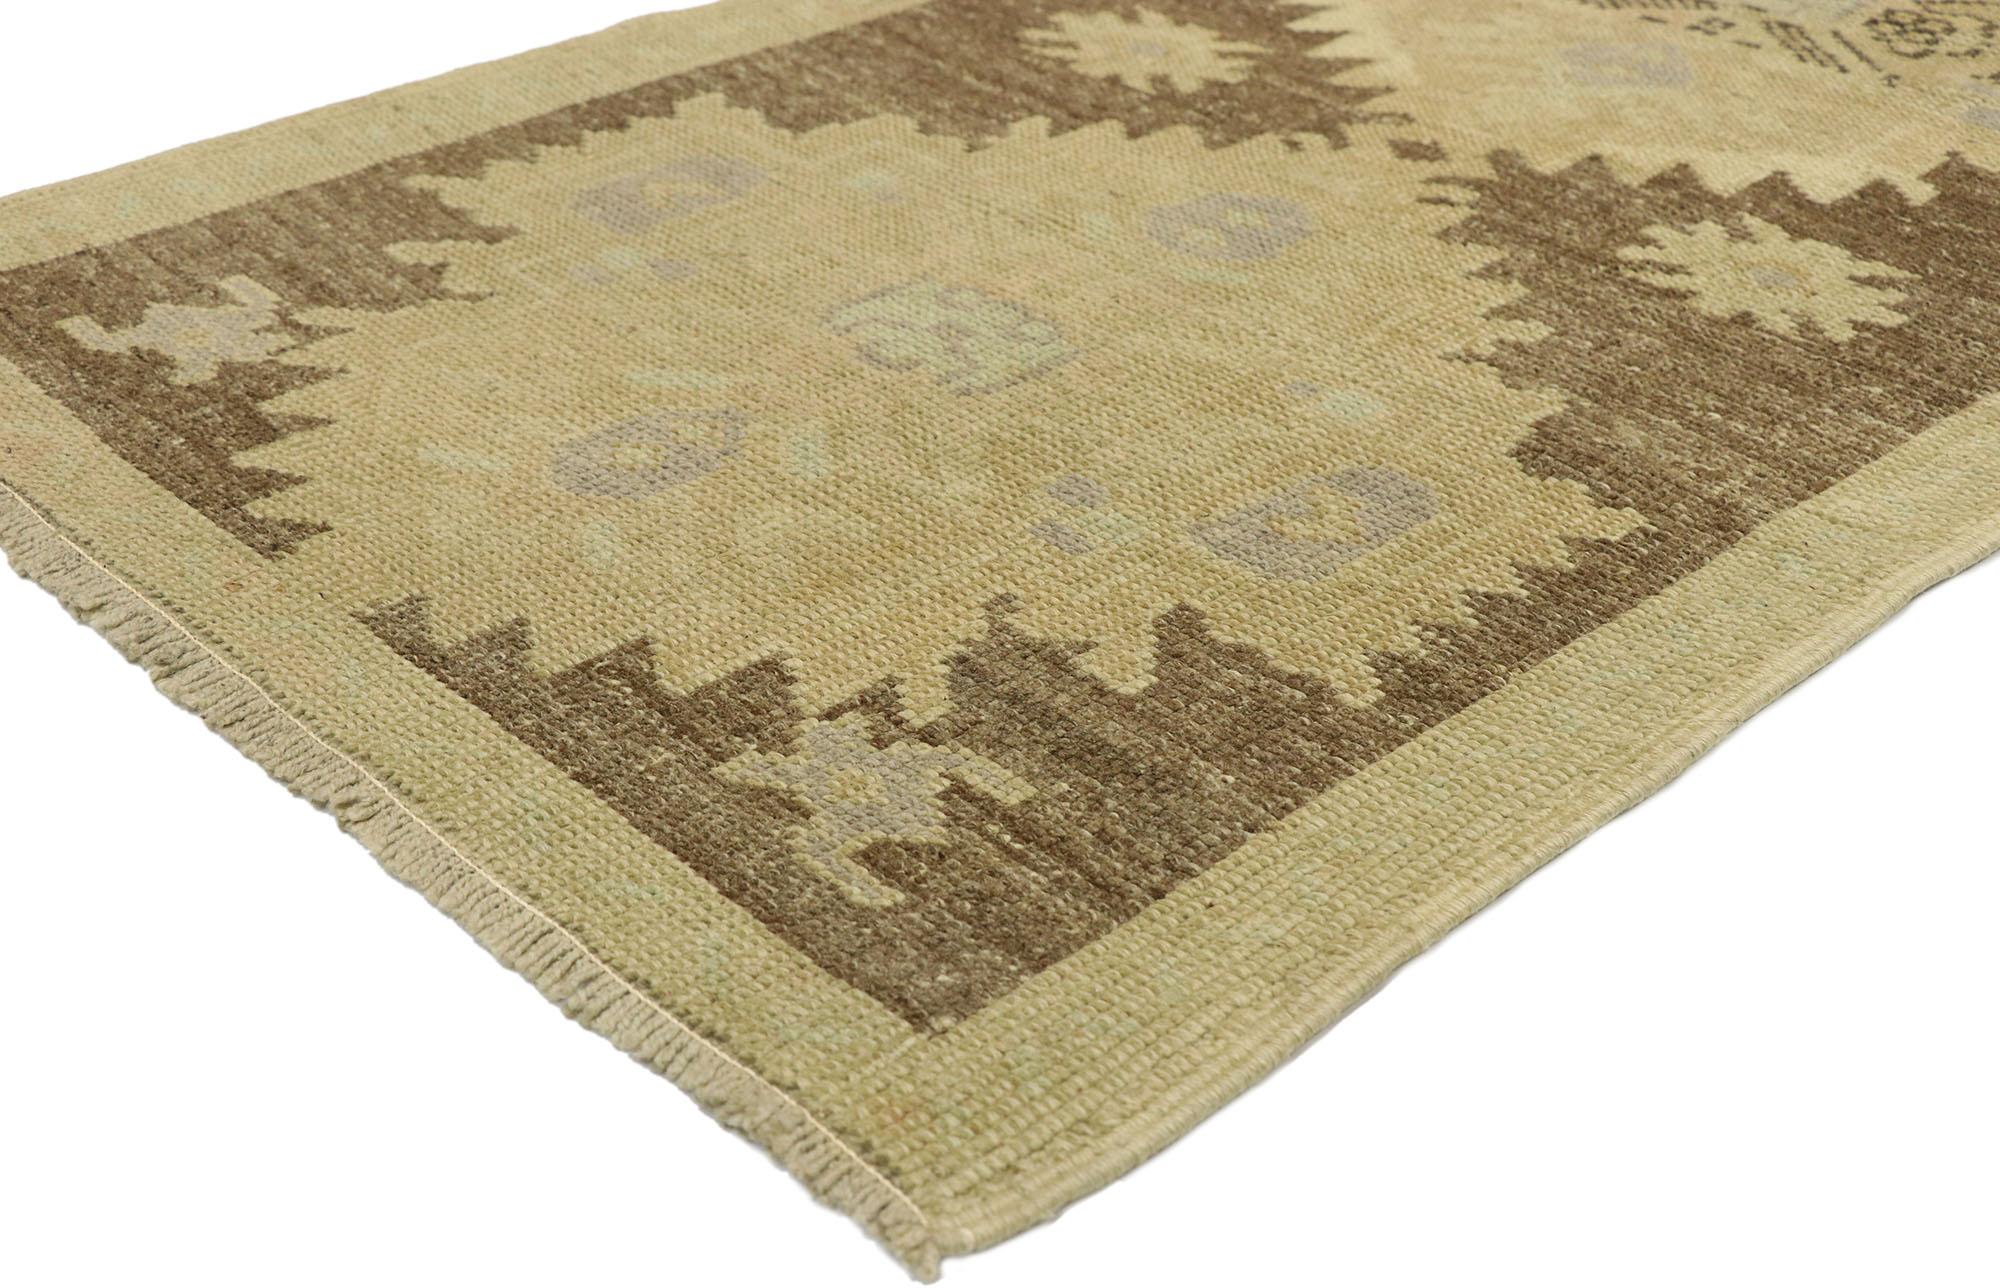 51126 vintage Turkish Oushak Accent rug with Rustic Shaker Farmhouse style. Shaker style and effortless beauty meet rustic sensibility in this hand knotted wool vintage Turkish Oushak rug. The antique-washed field features three serrated medallions